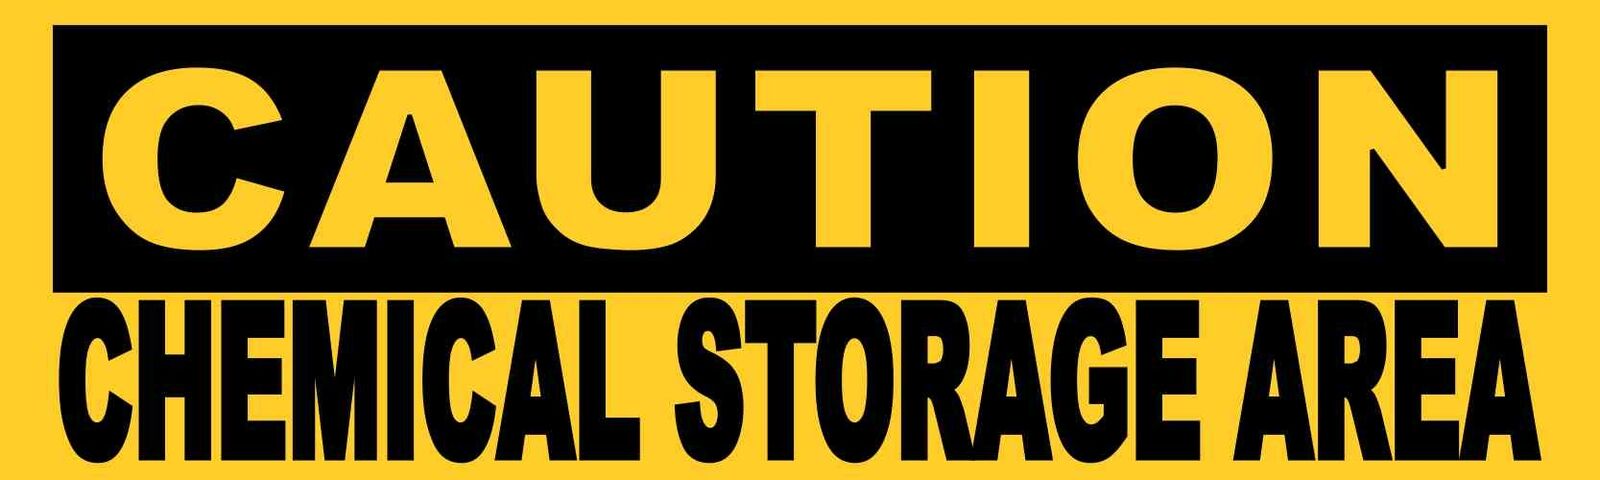 10 x 3 Caution Chemical Storage Area Magnet Magnetic Sign Magnets Business Decal